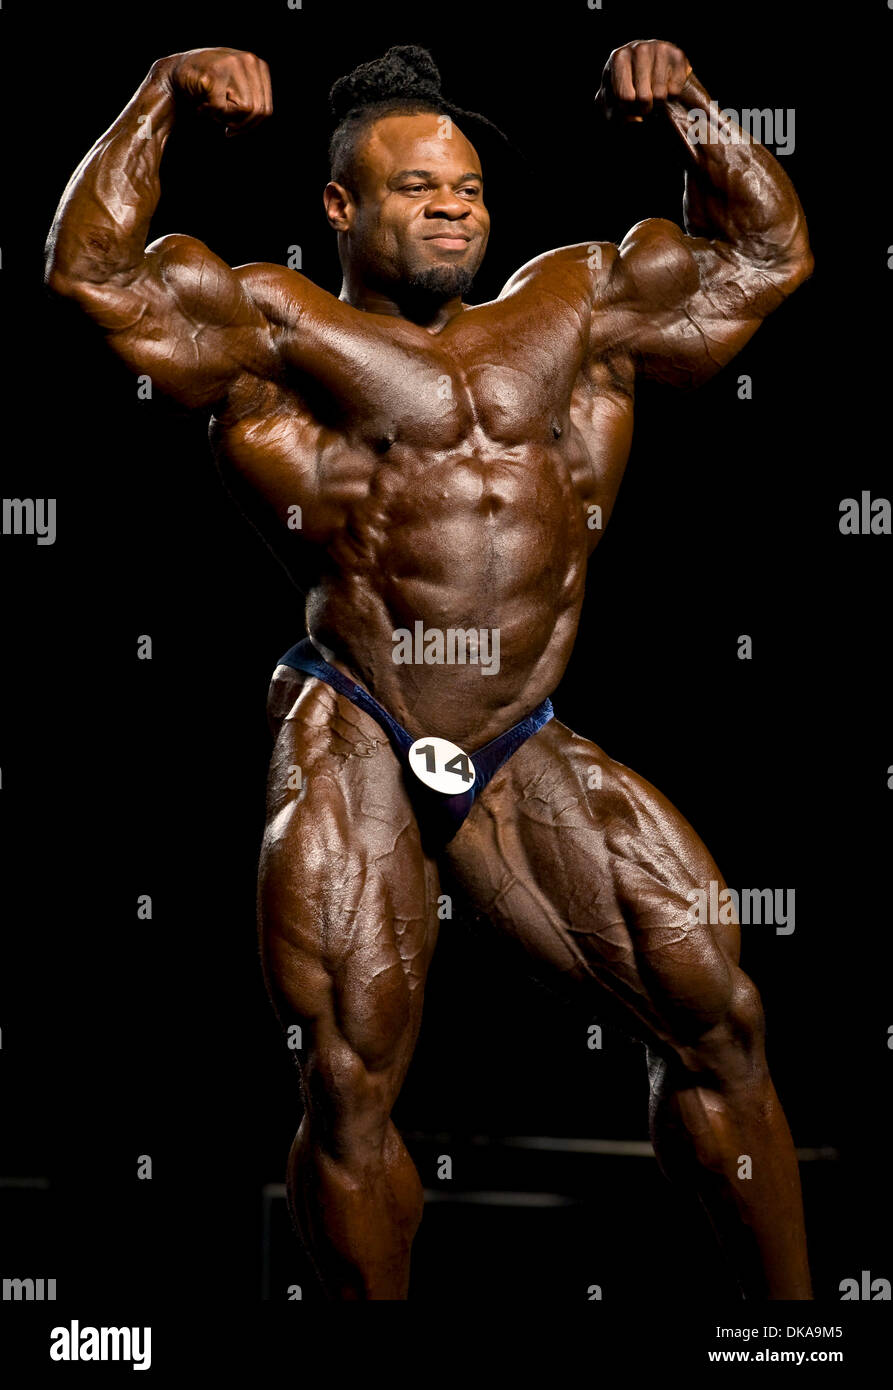 Kai Greene Photos and Premium High Res Pictures - Getty Images